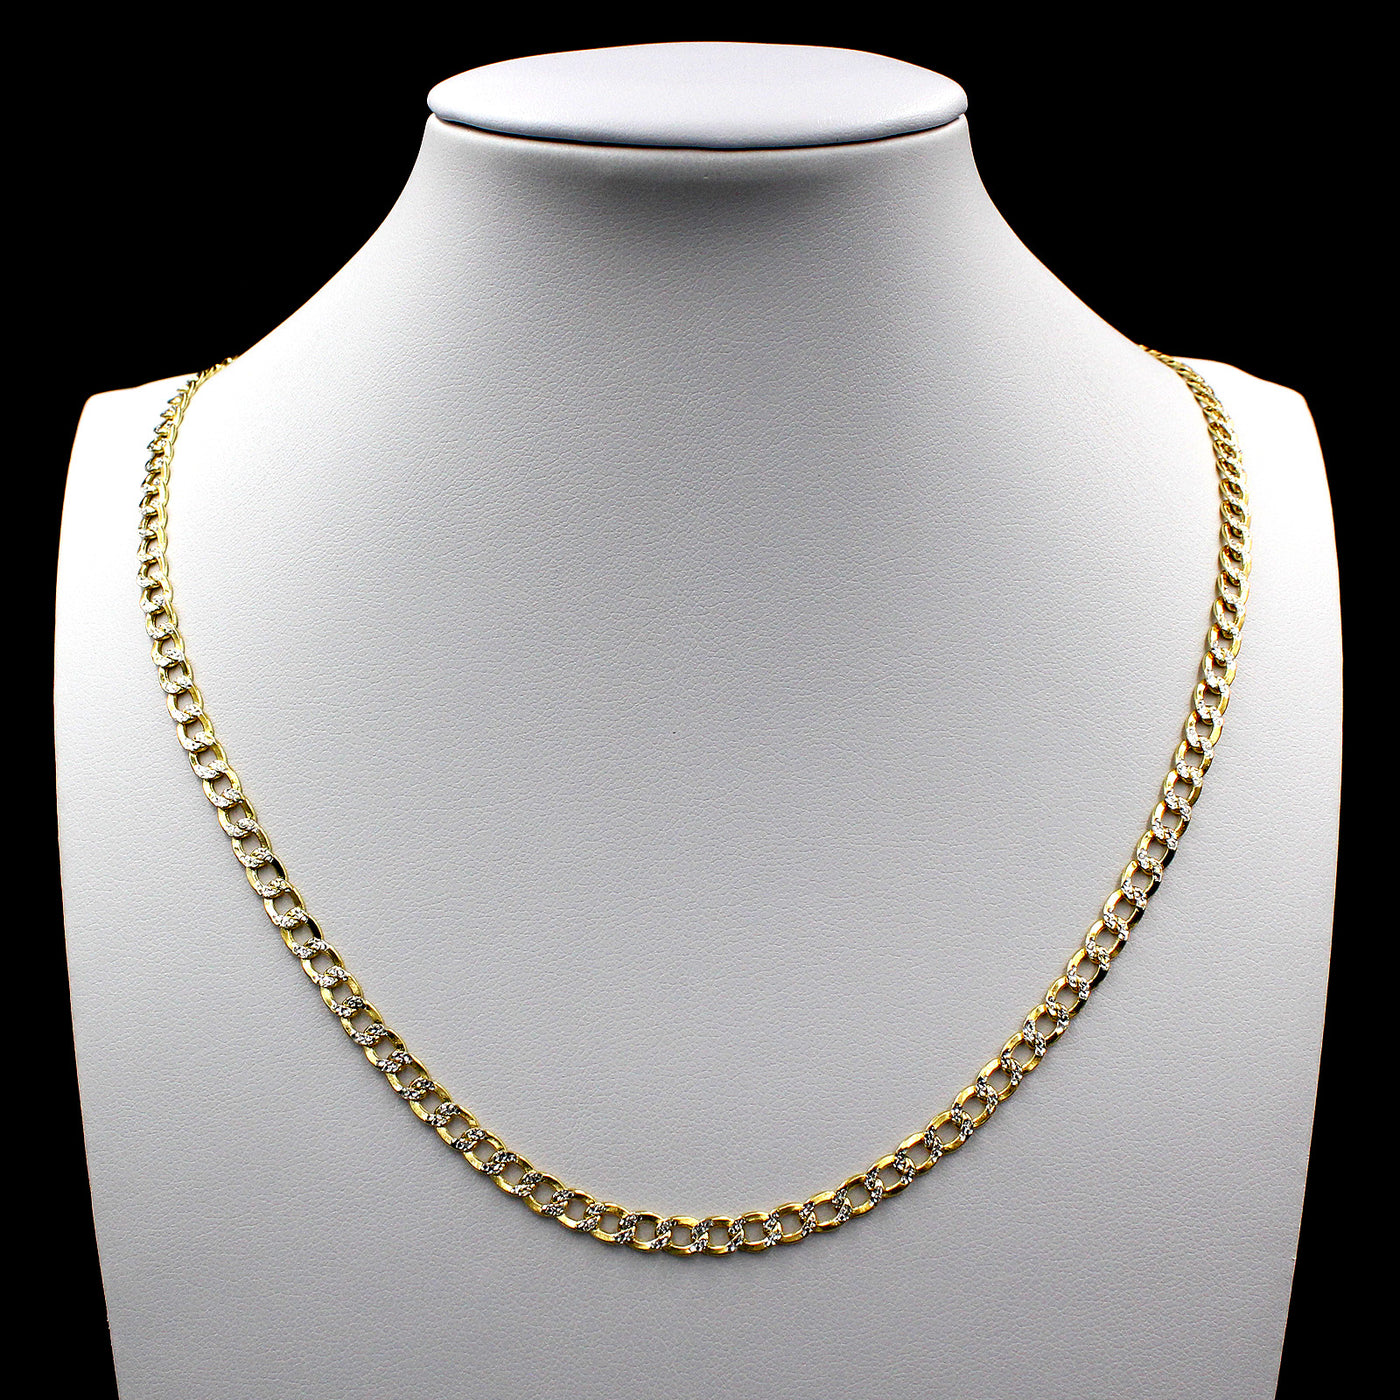 10K Solid Yellow Gold Diamond Cut Pave Cuban Link Chain Necklace 3.5MM 16" 18" 20" 22" 24" 26"